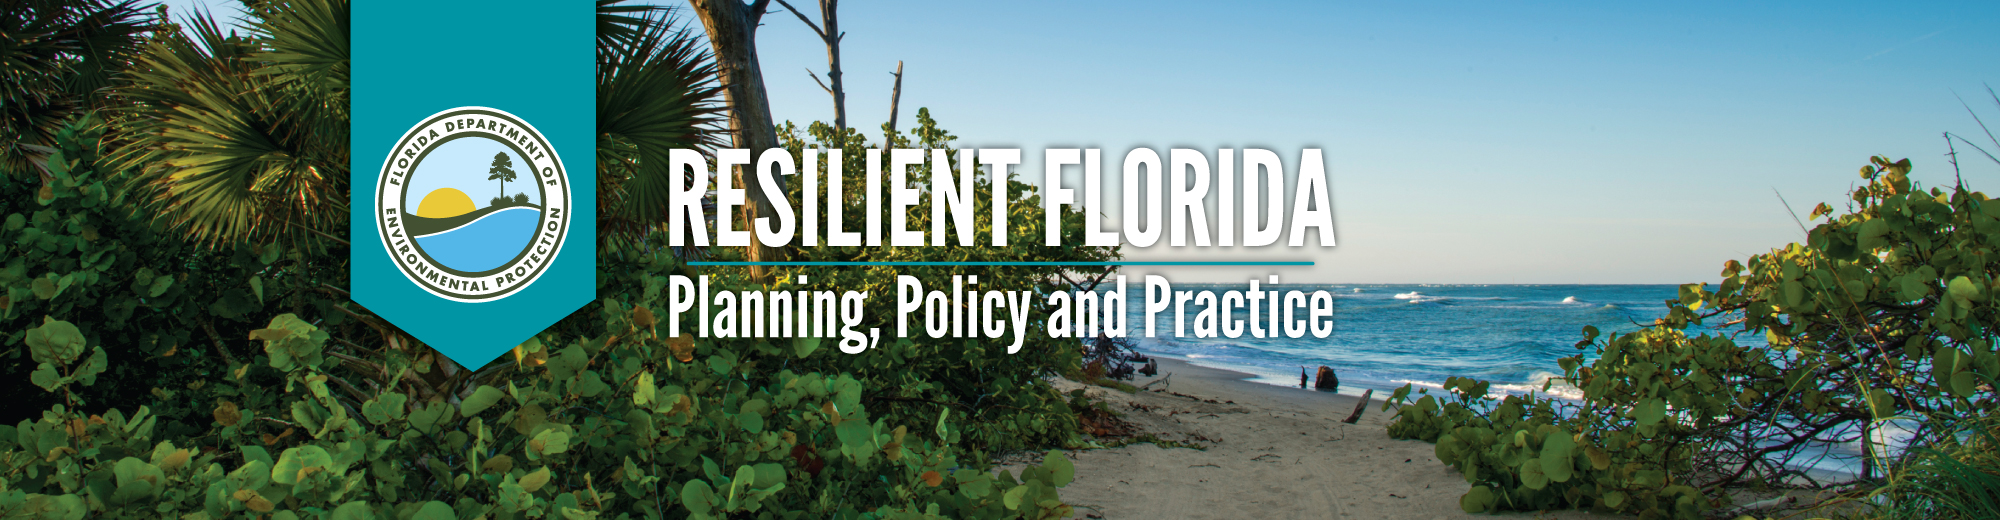 Resilient Florida: Planning, Policy and Practice